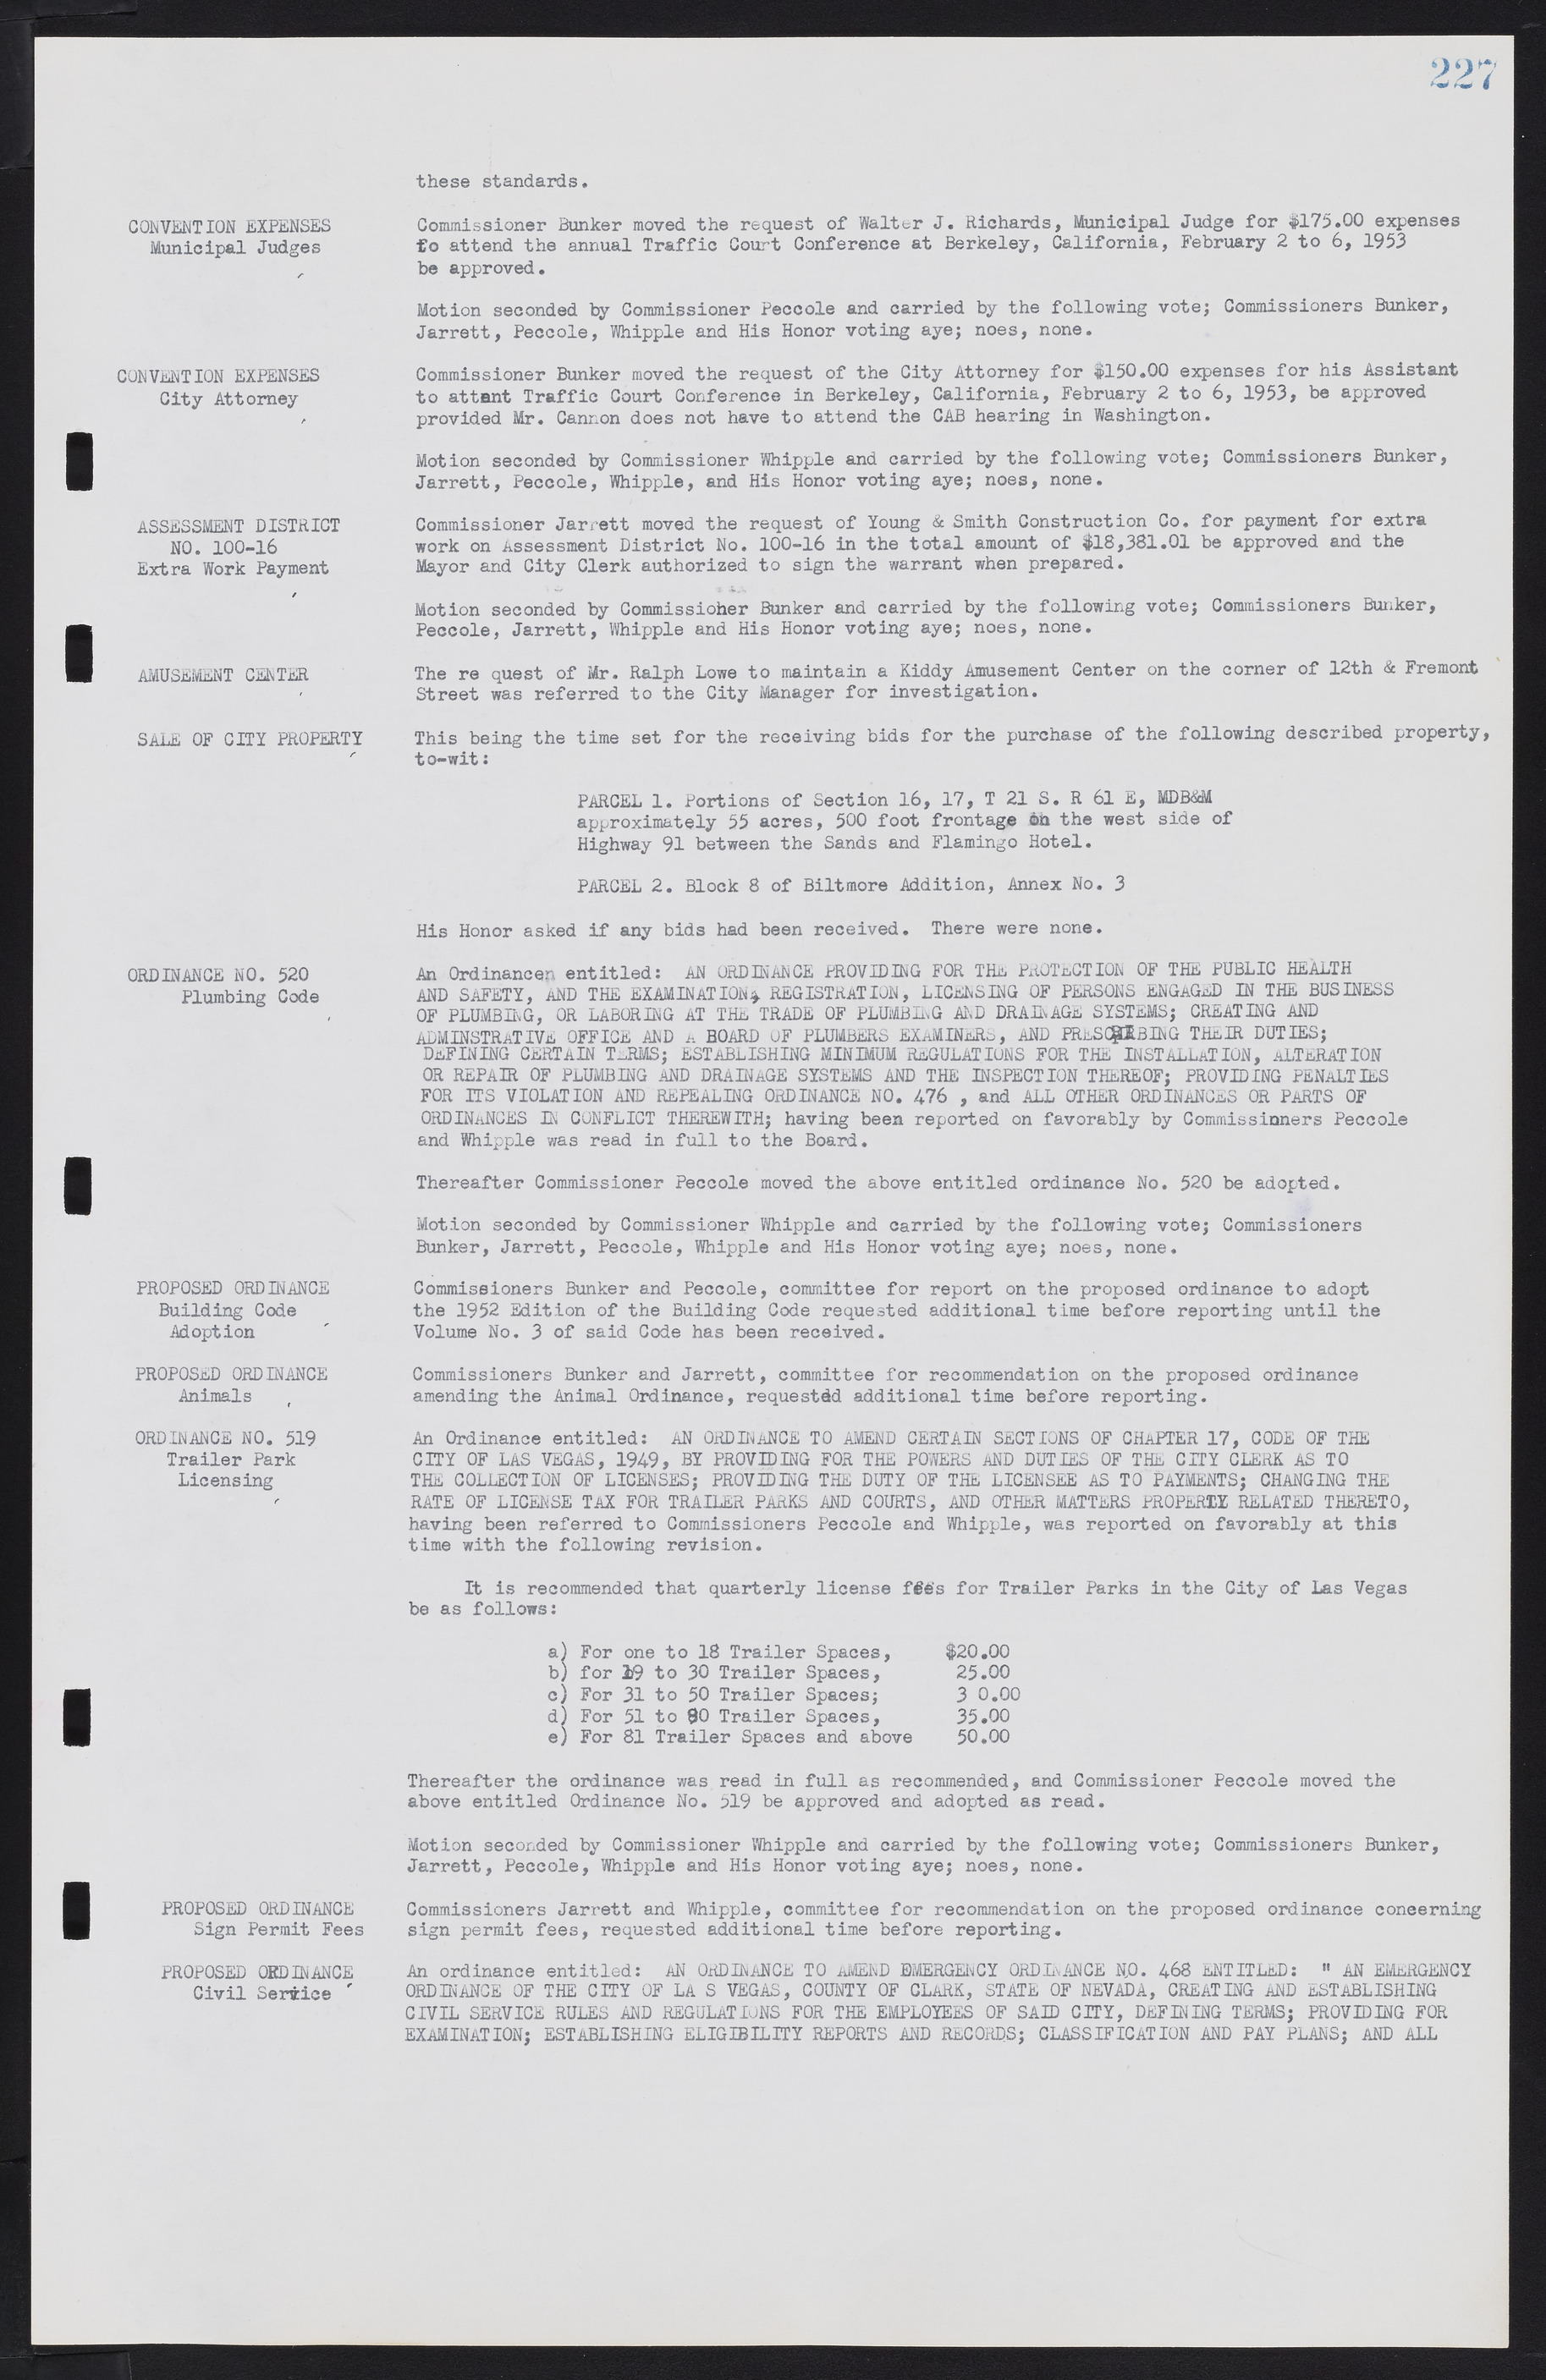 Las Vegas City Commission Minutes, May 26, 1952 to February 17, 1954, lvc000008-243